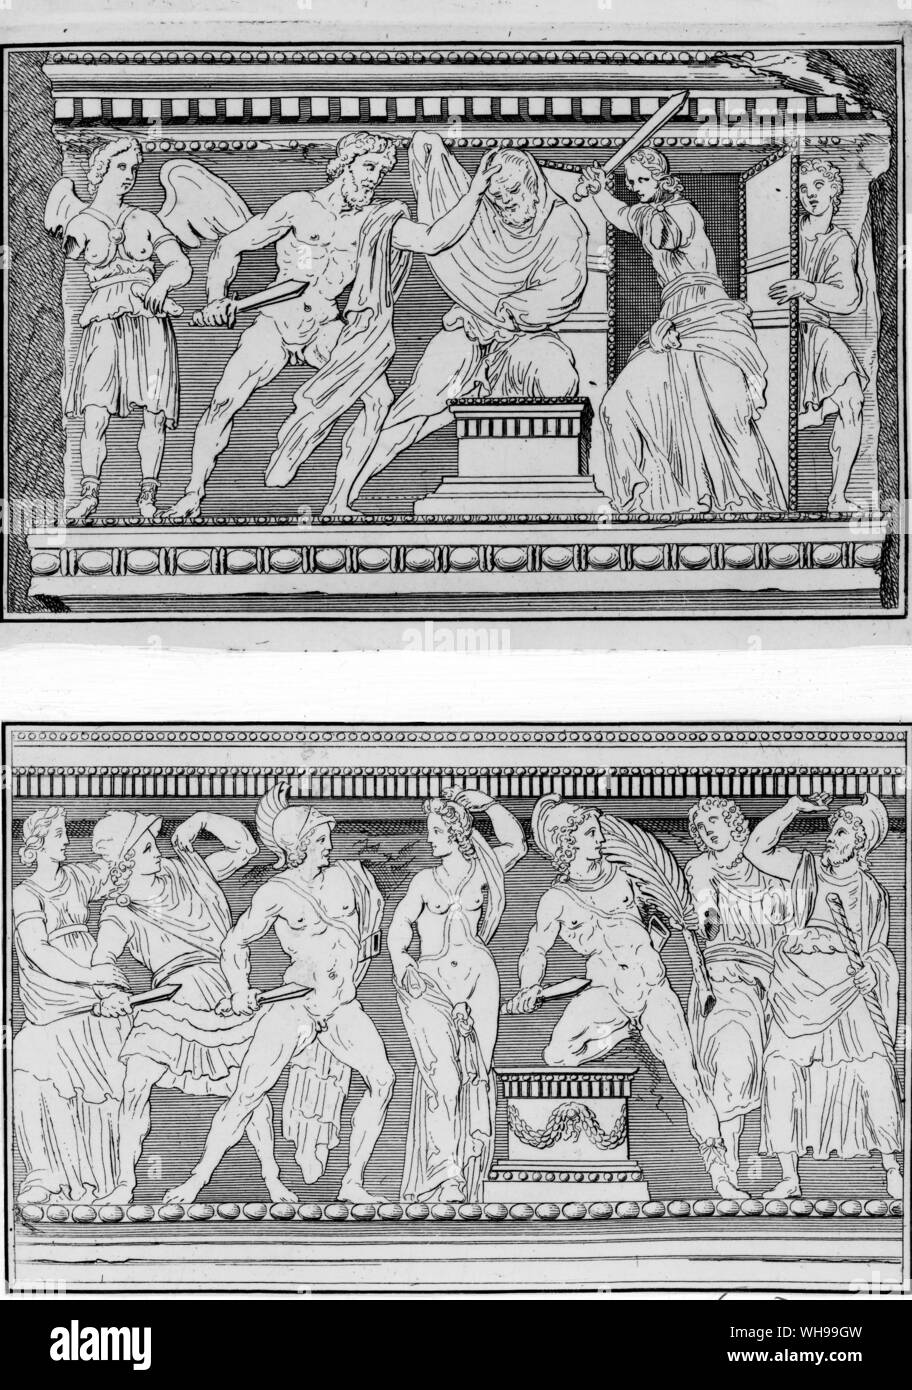 Illustration from Dempster's De Etruria showing episodes from greek mythology carved on the sides of a marble sarcophagus Stock Photo